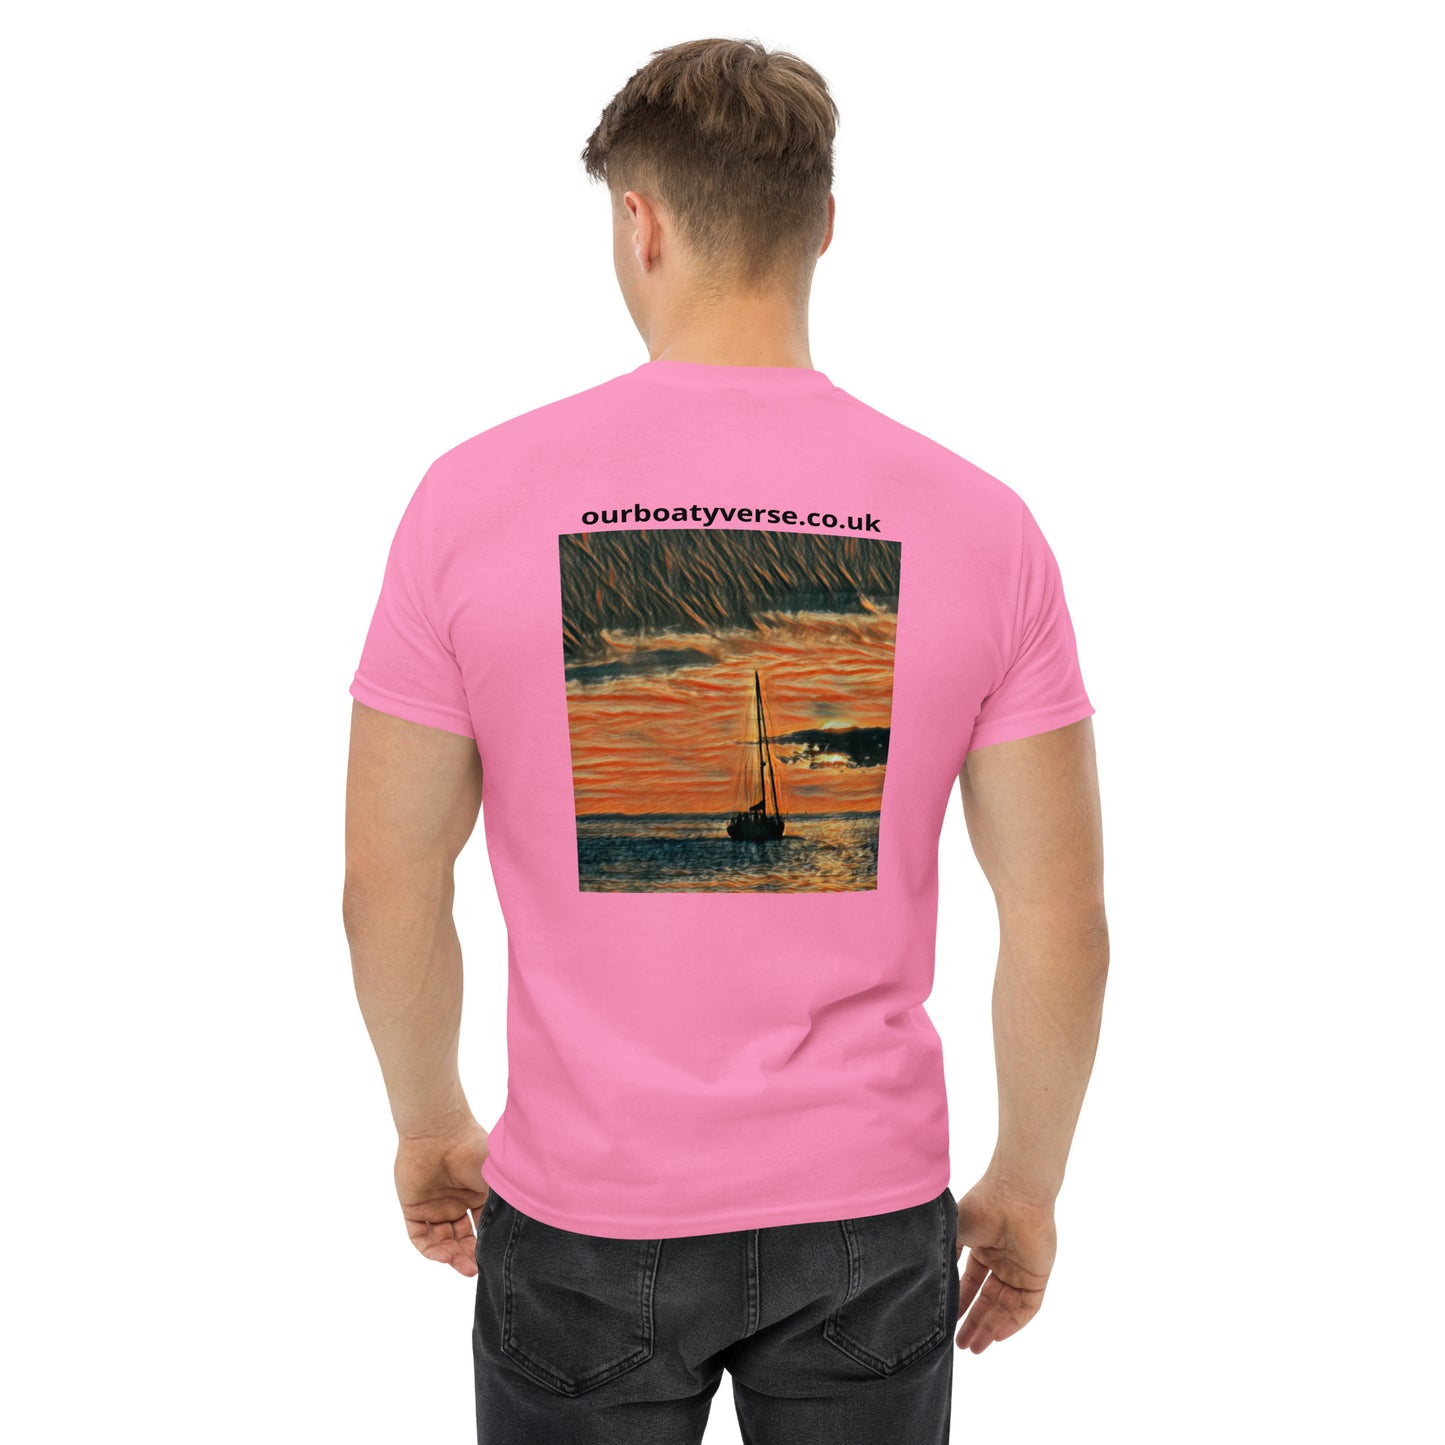 Our BoatyVerse Sailing into Sunset Oil Painting Style Men's classic tee